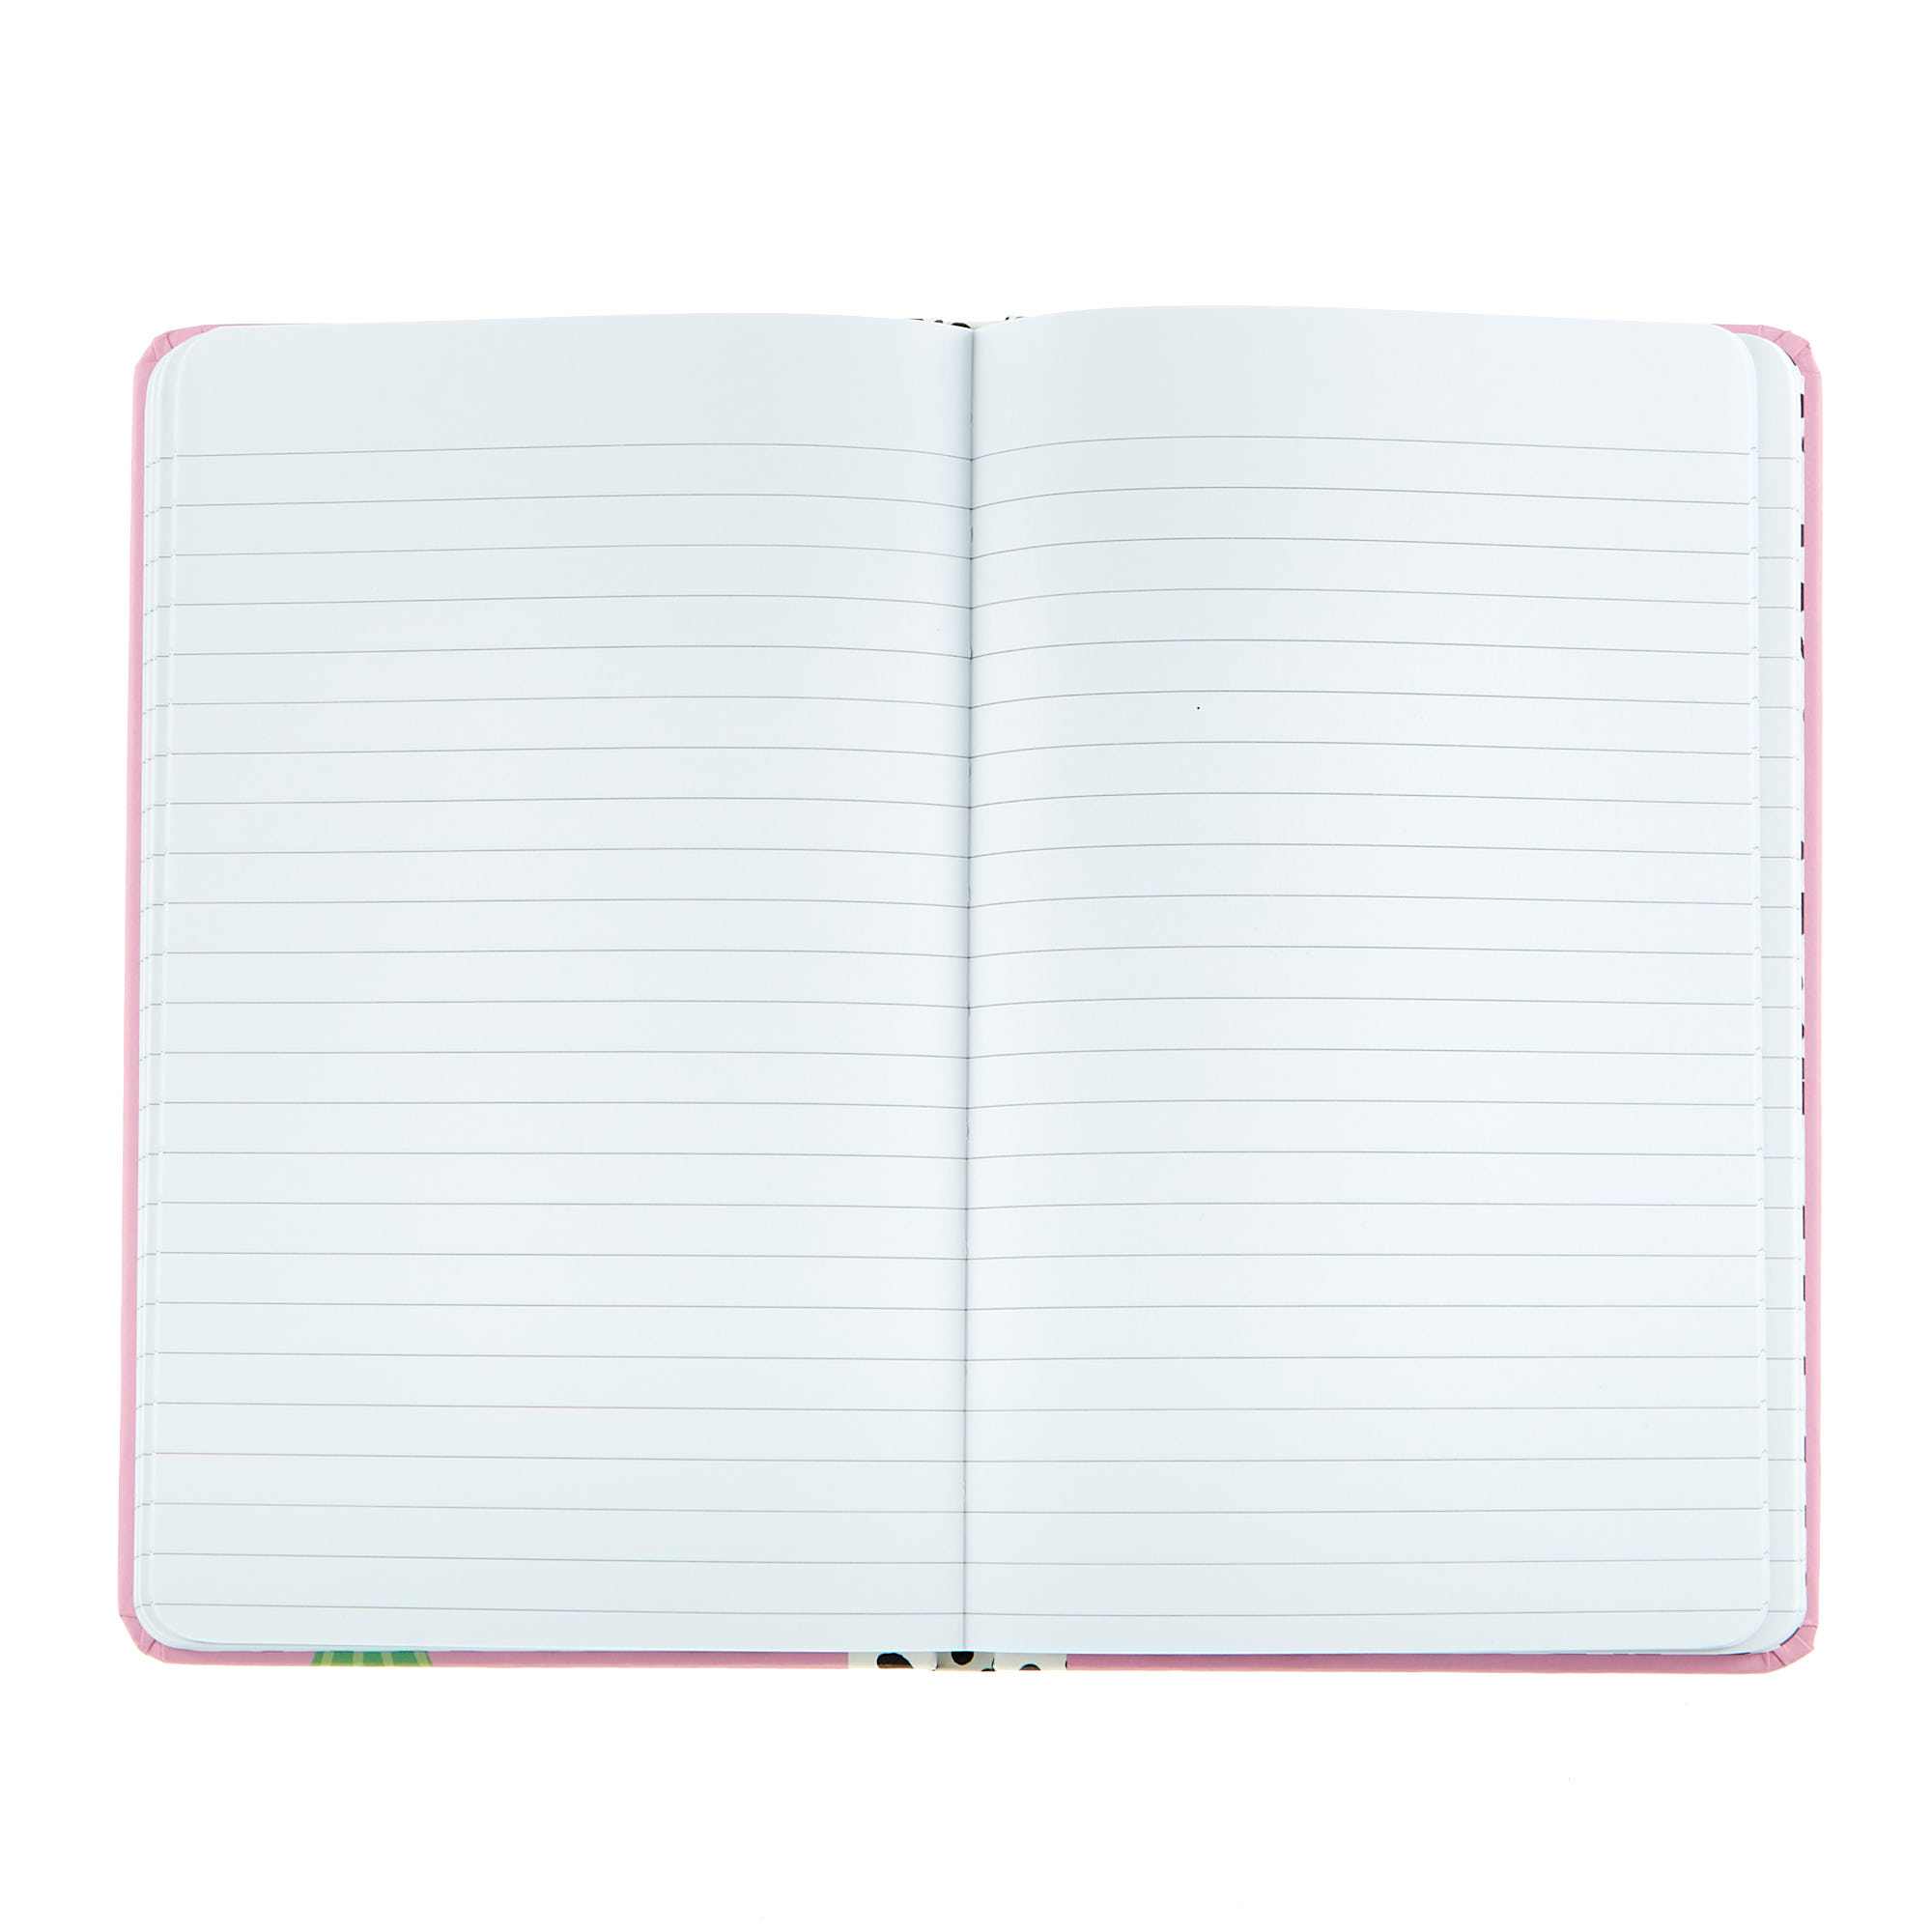 Pukka Planet Soft Cover Don't Be a Prick Notebook